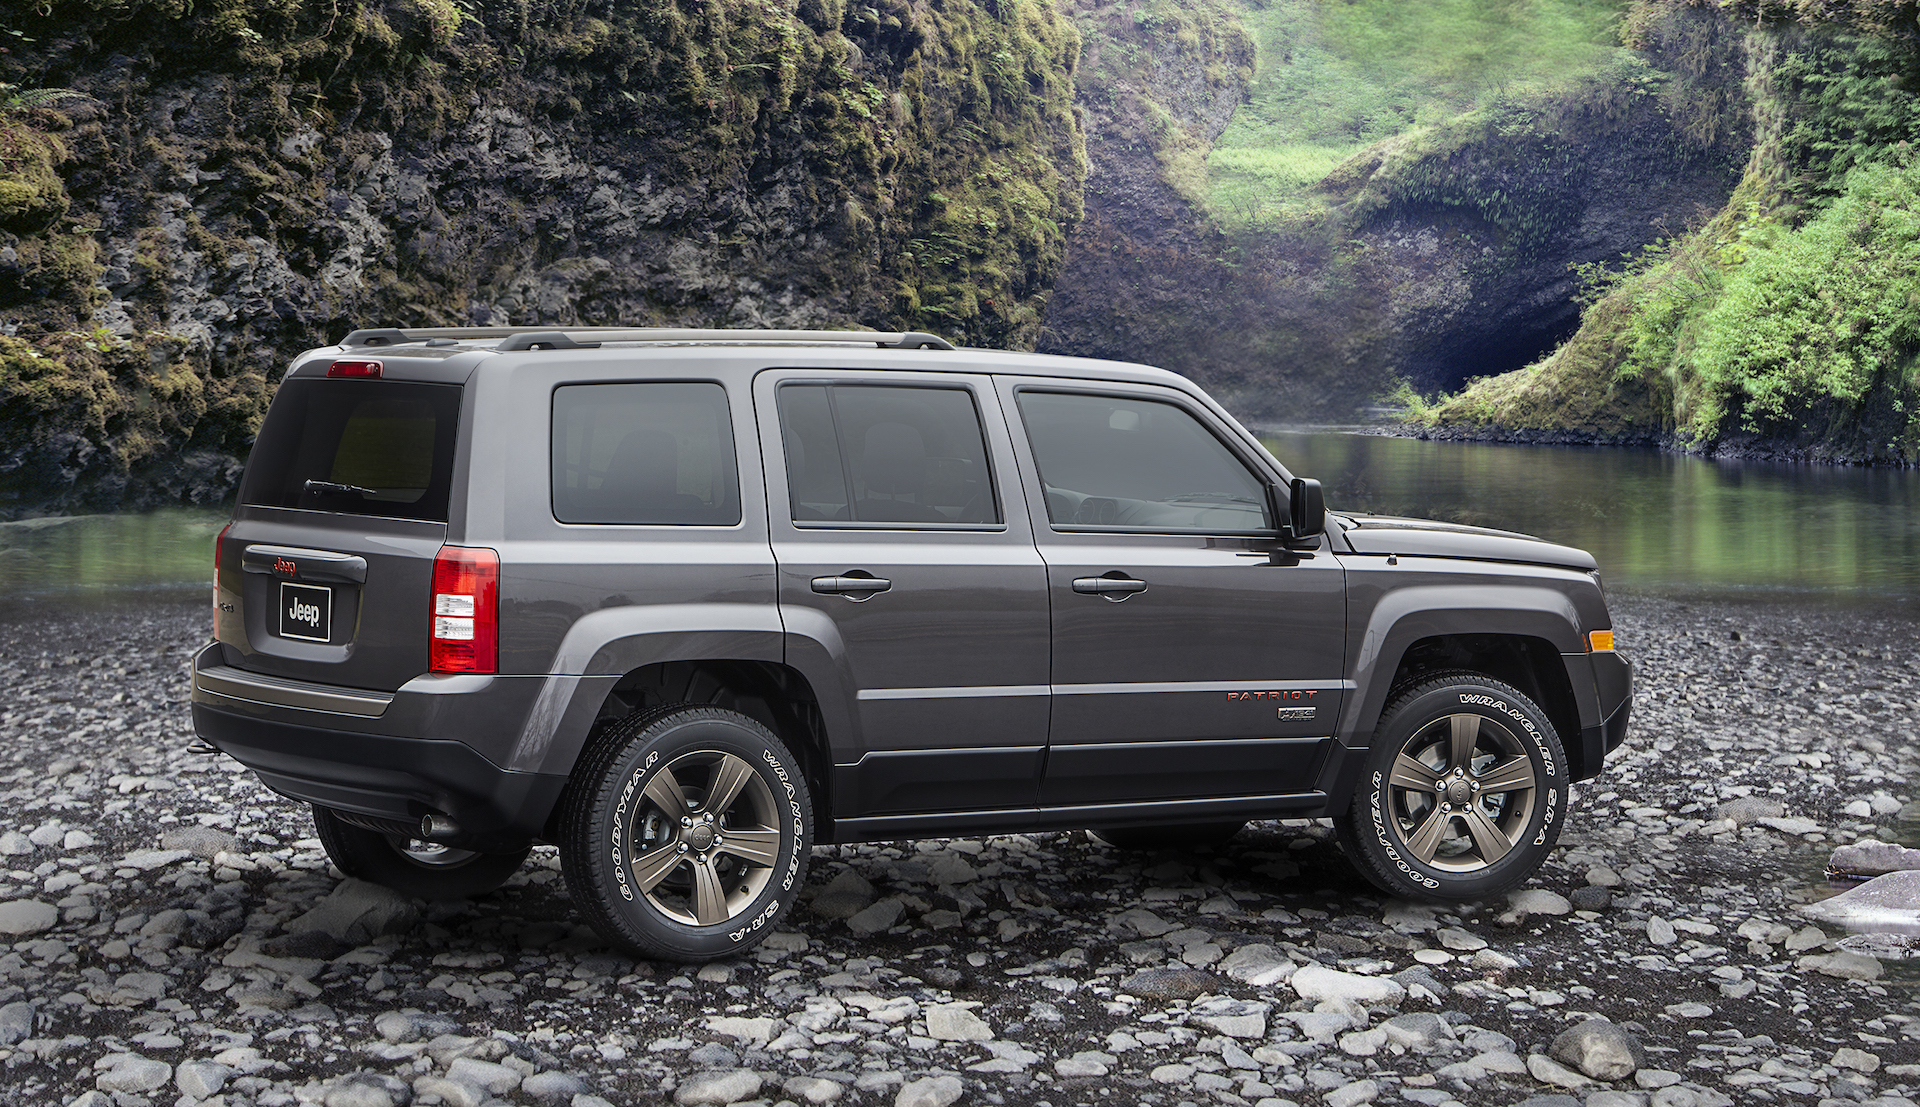 2017 Jeep Patriot Review: Prices, Specs, and Photos - The Car Connection